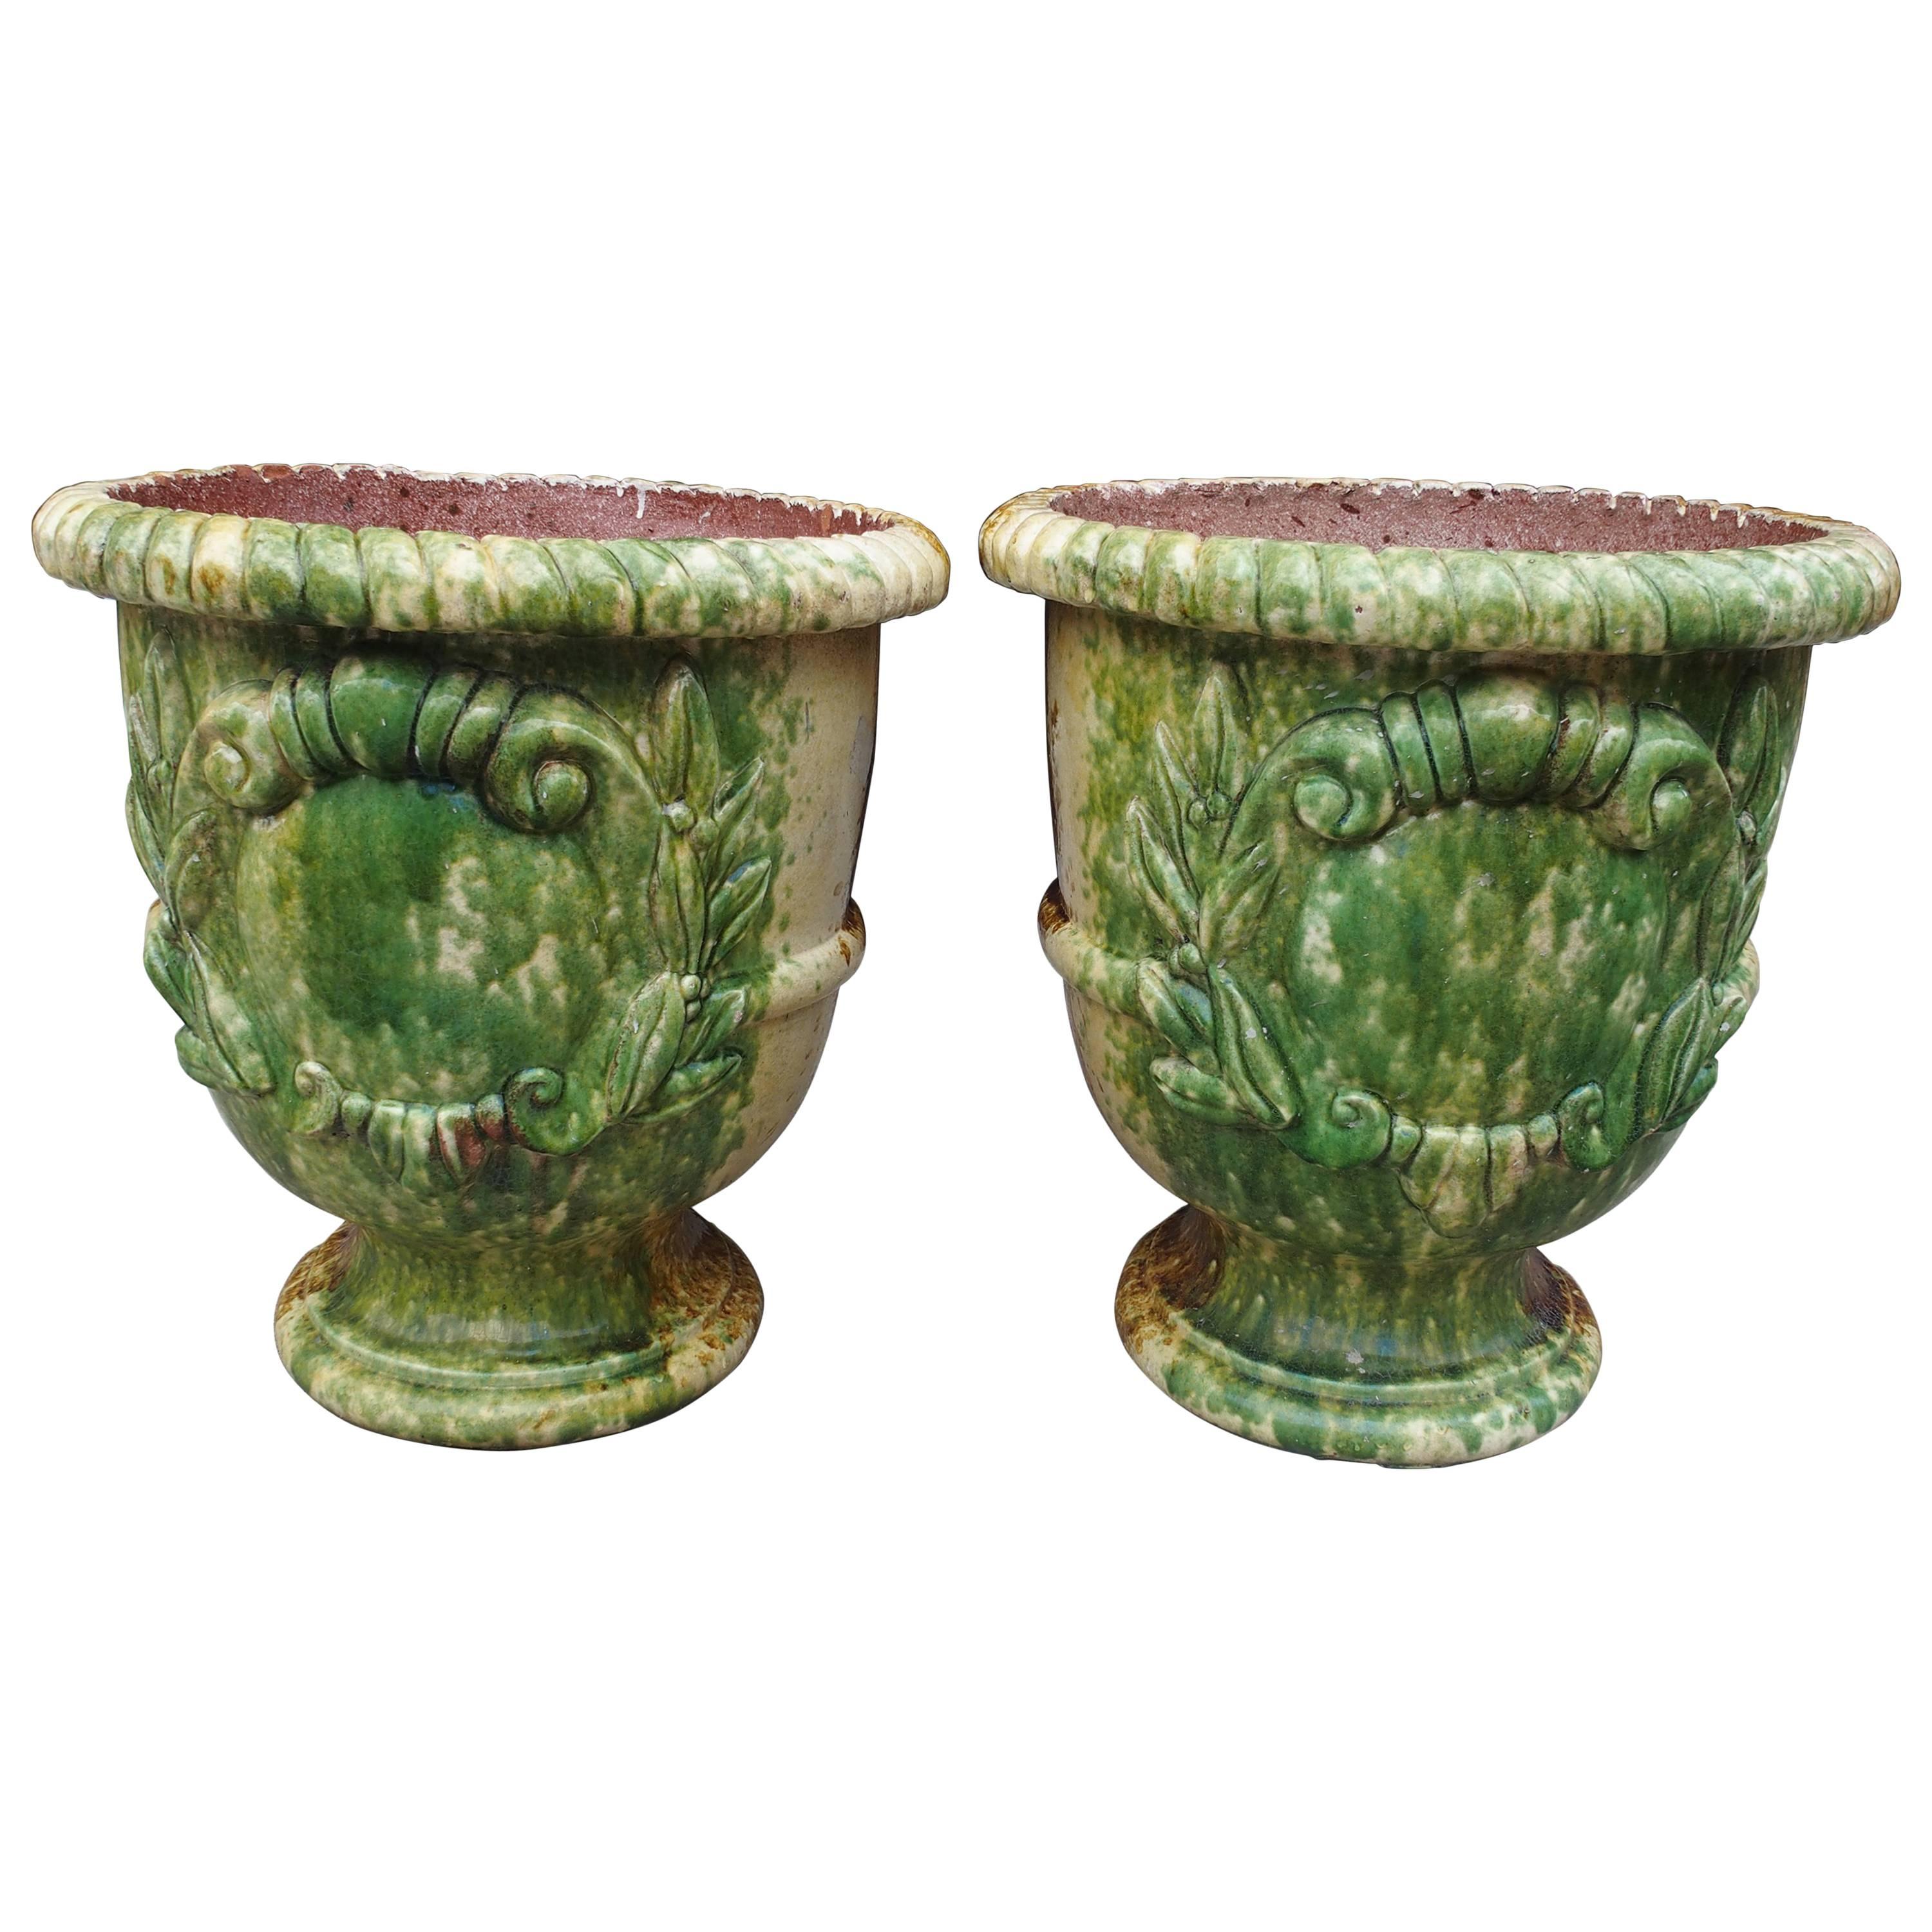 Pair of Glazed French Anduze Pots